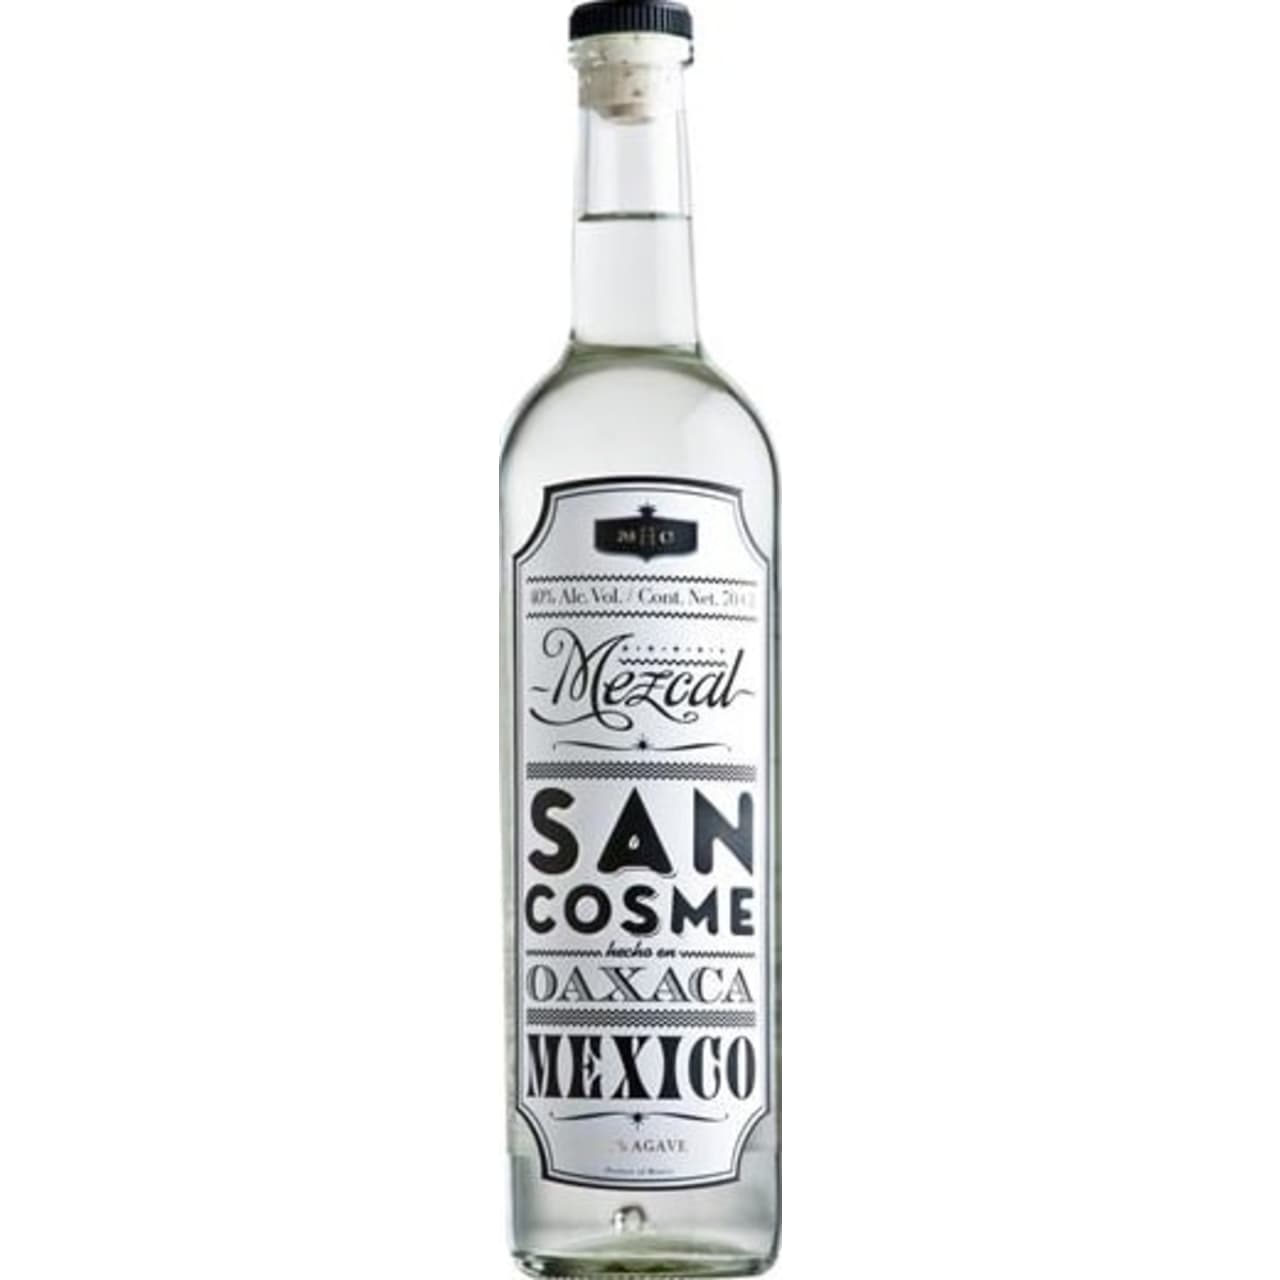 Produced in small batches in Oaxaca, Mexico, Mezcal San Cosme is made with 100% Espadin agave and possesses a beautiful, complex palate with smokiness and caramel sweetness.